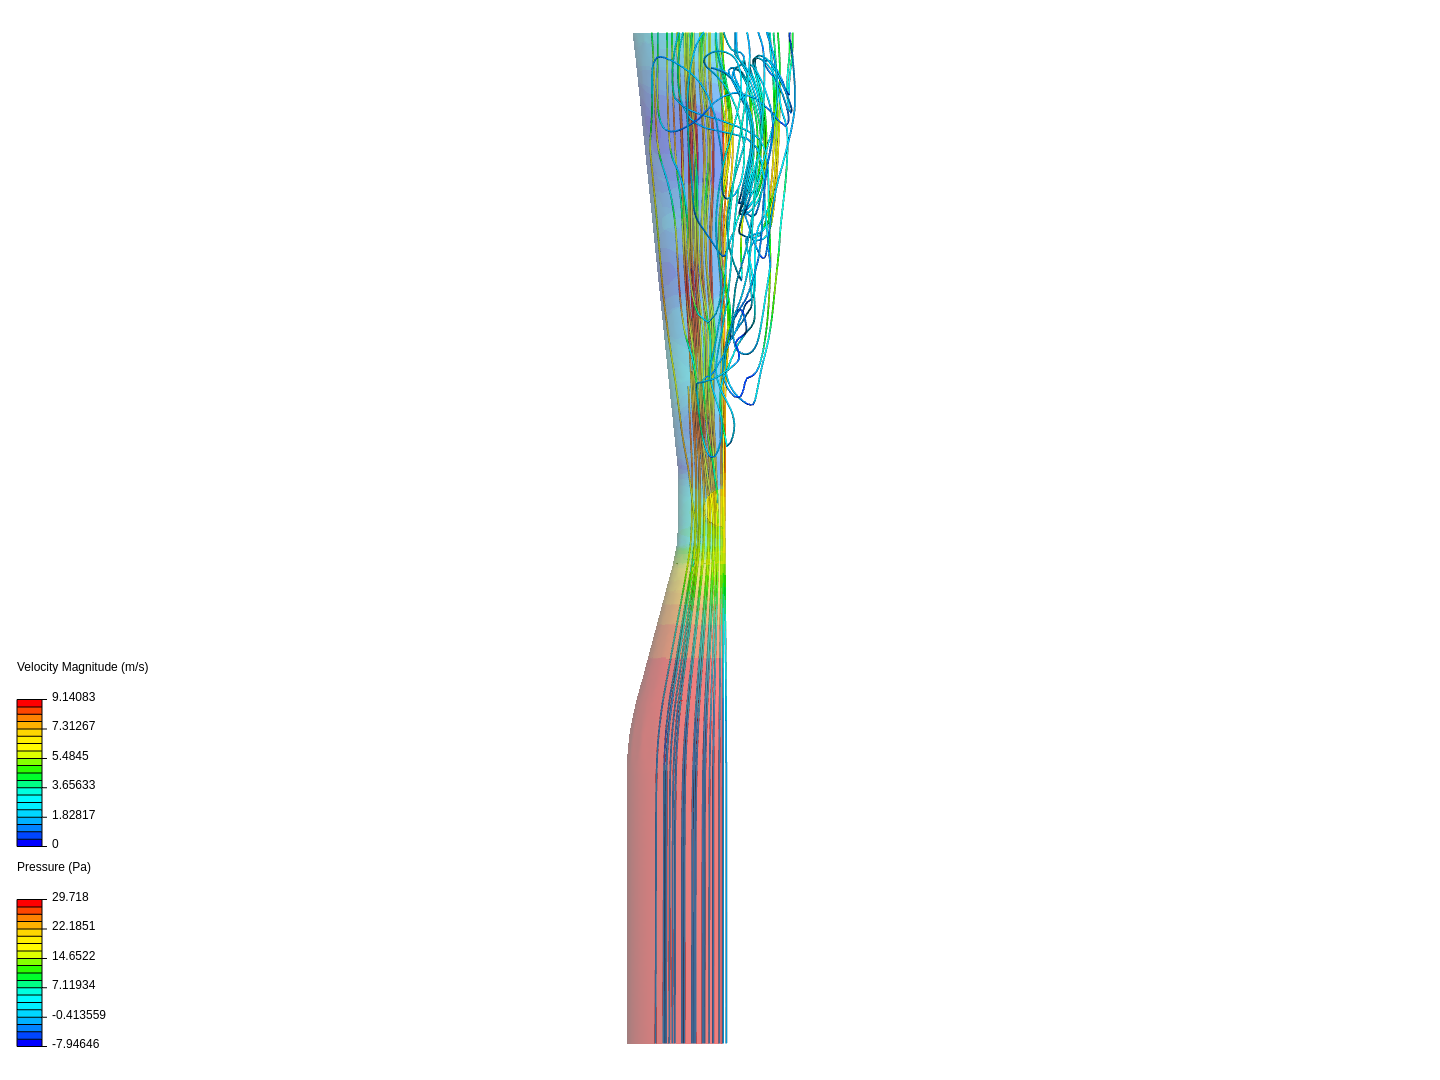 Incompressible Flow Analysis of the Venturi Injector image